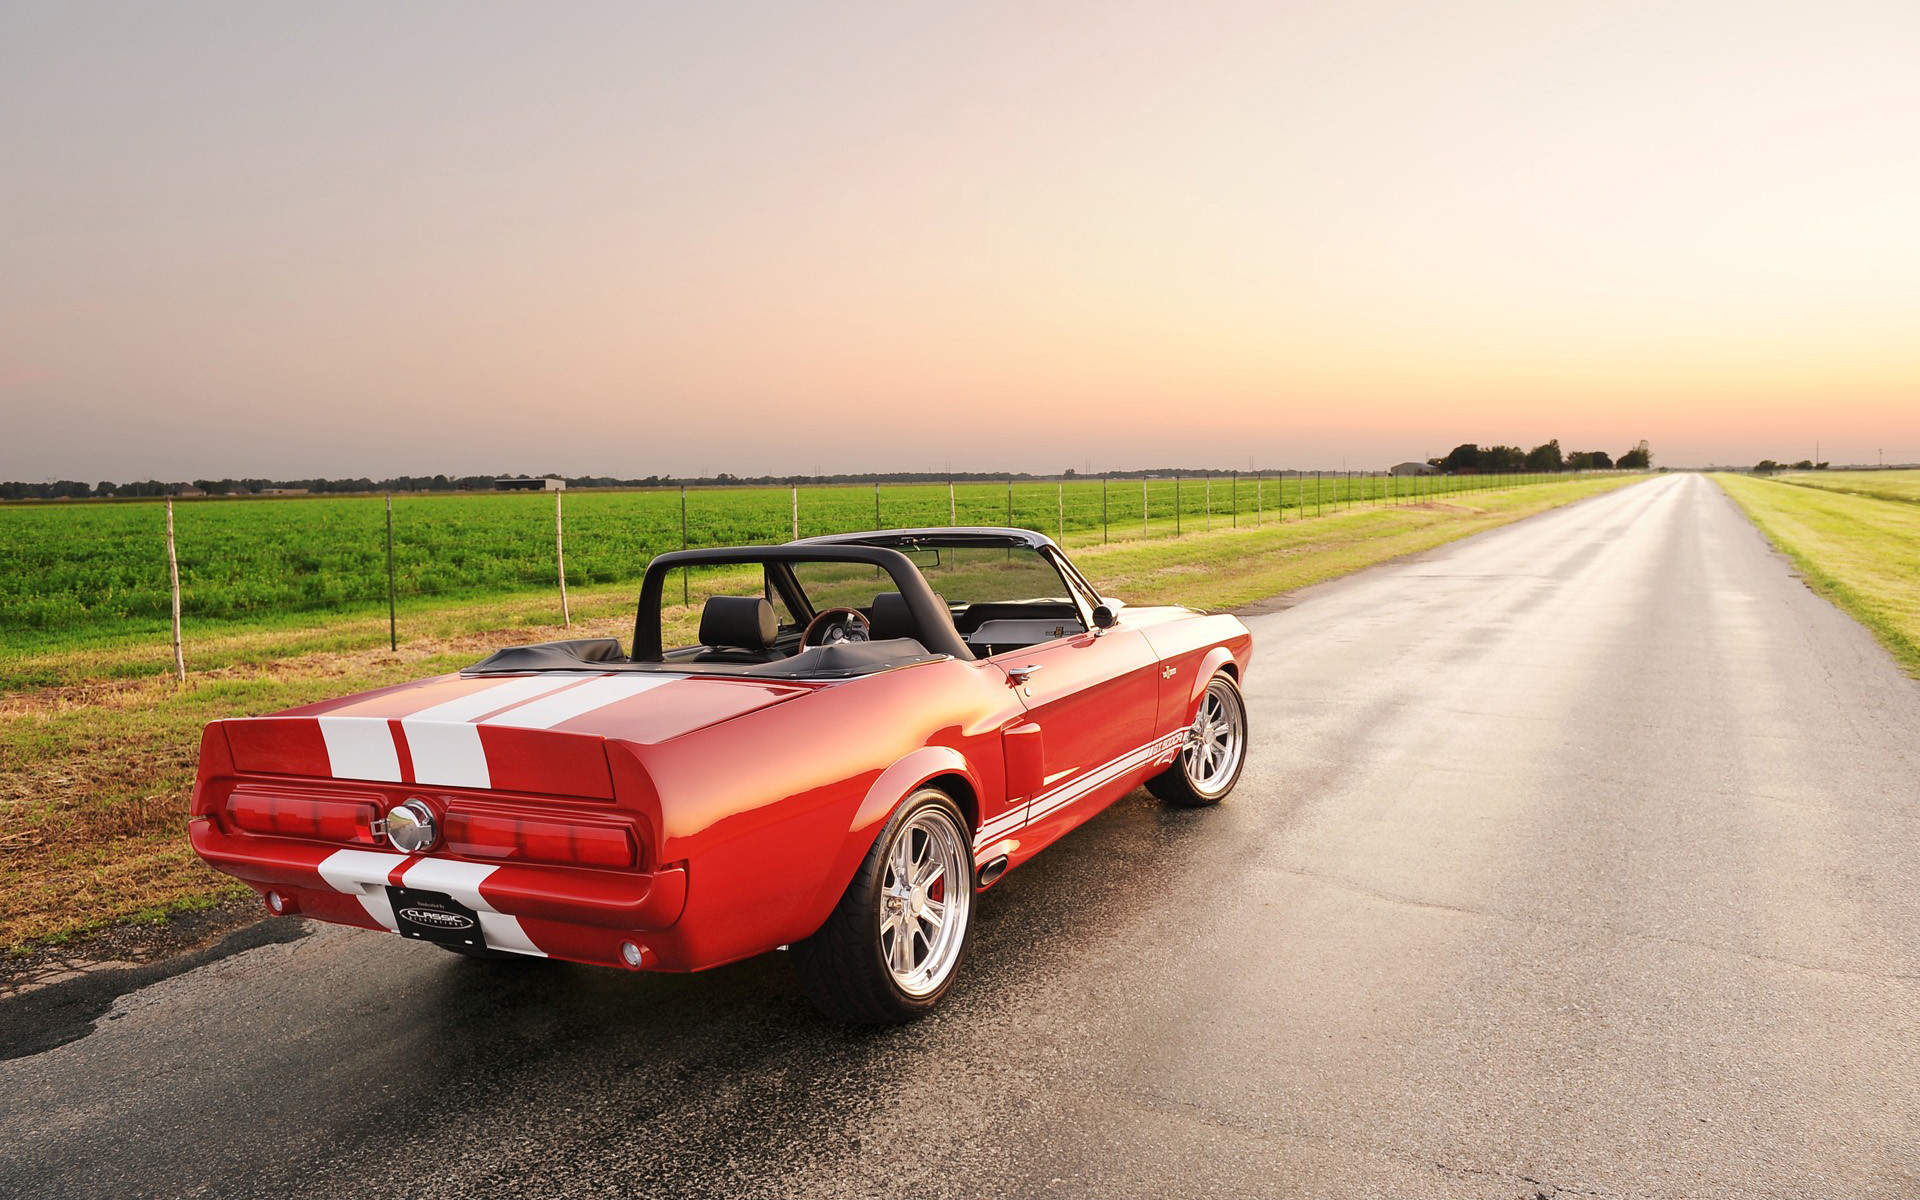 vehicles, shelby gt500 classic recreation, classic car, convertible, muscle car, ford Image for desktop